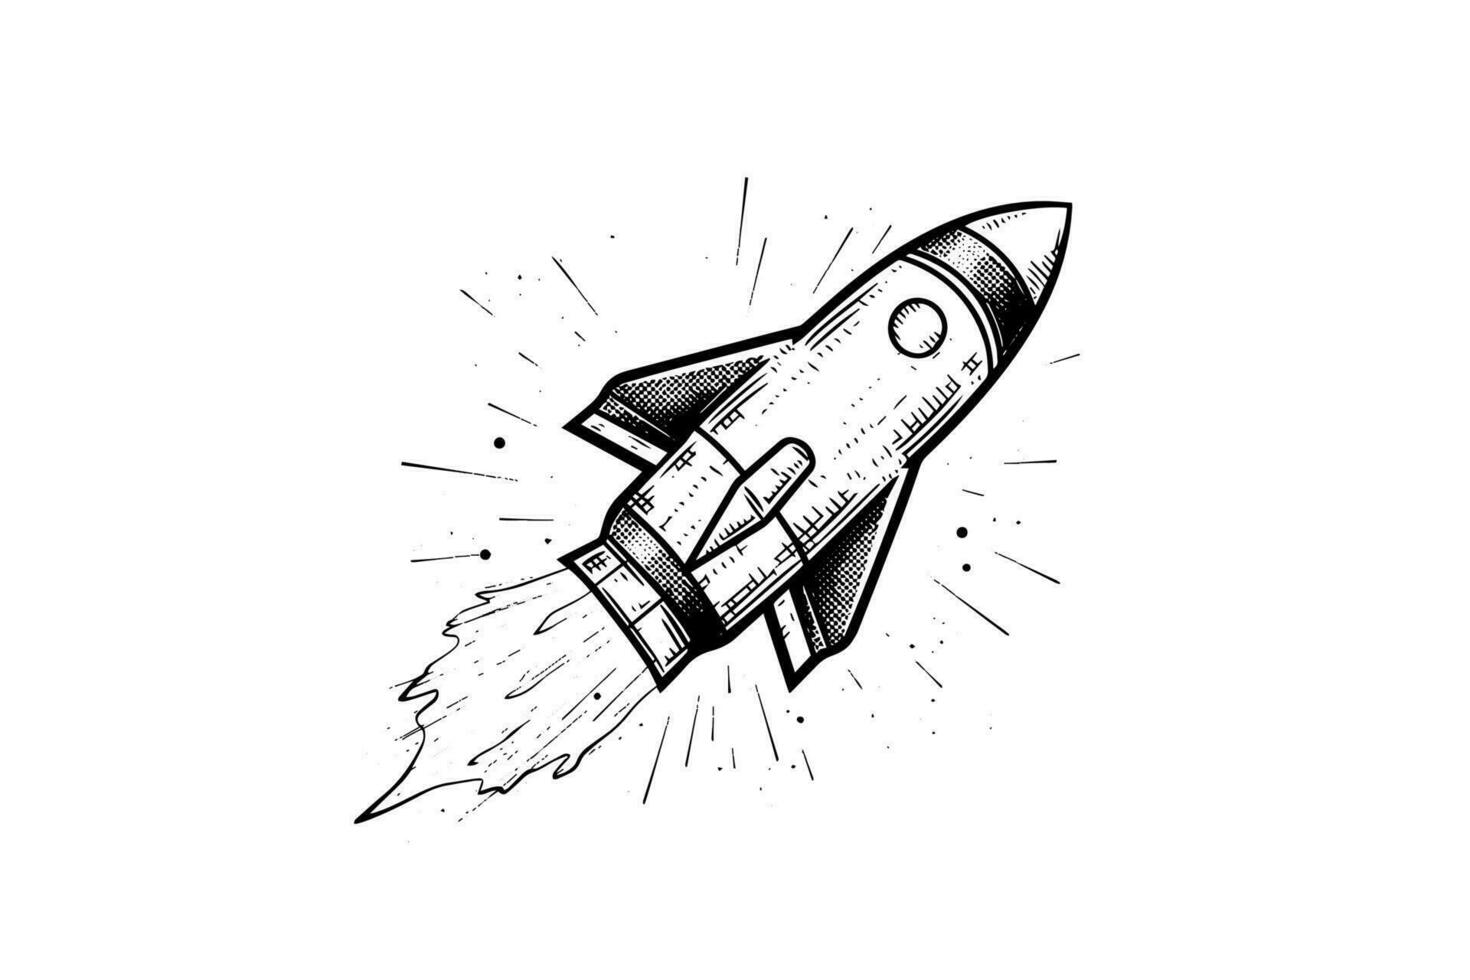 Blowing space rocket sketch engraving style vector illustration.